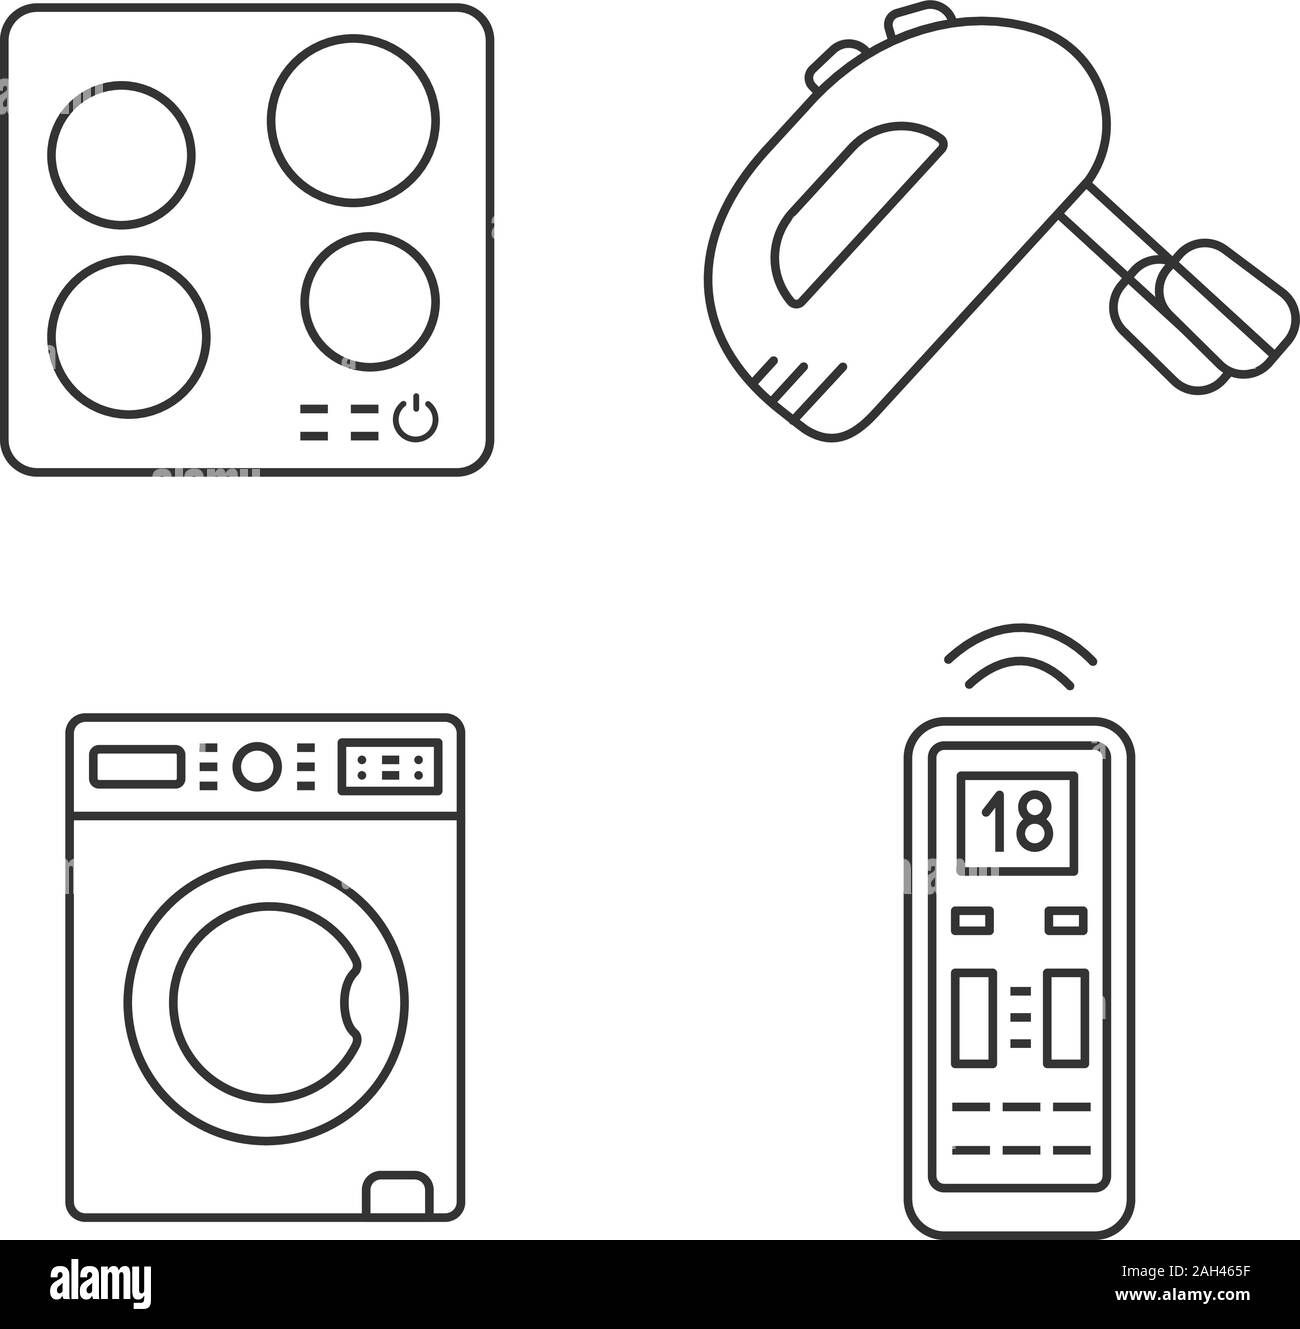 Household appliance linear icons set. Electric induction hob, handheld mixer, washing machine, air conditioner remote control. Thin line symbols. Isol Stock Vector